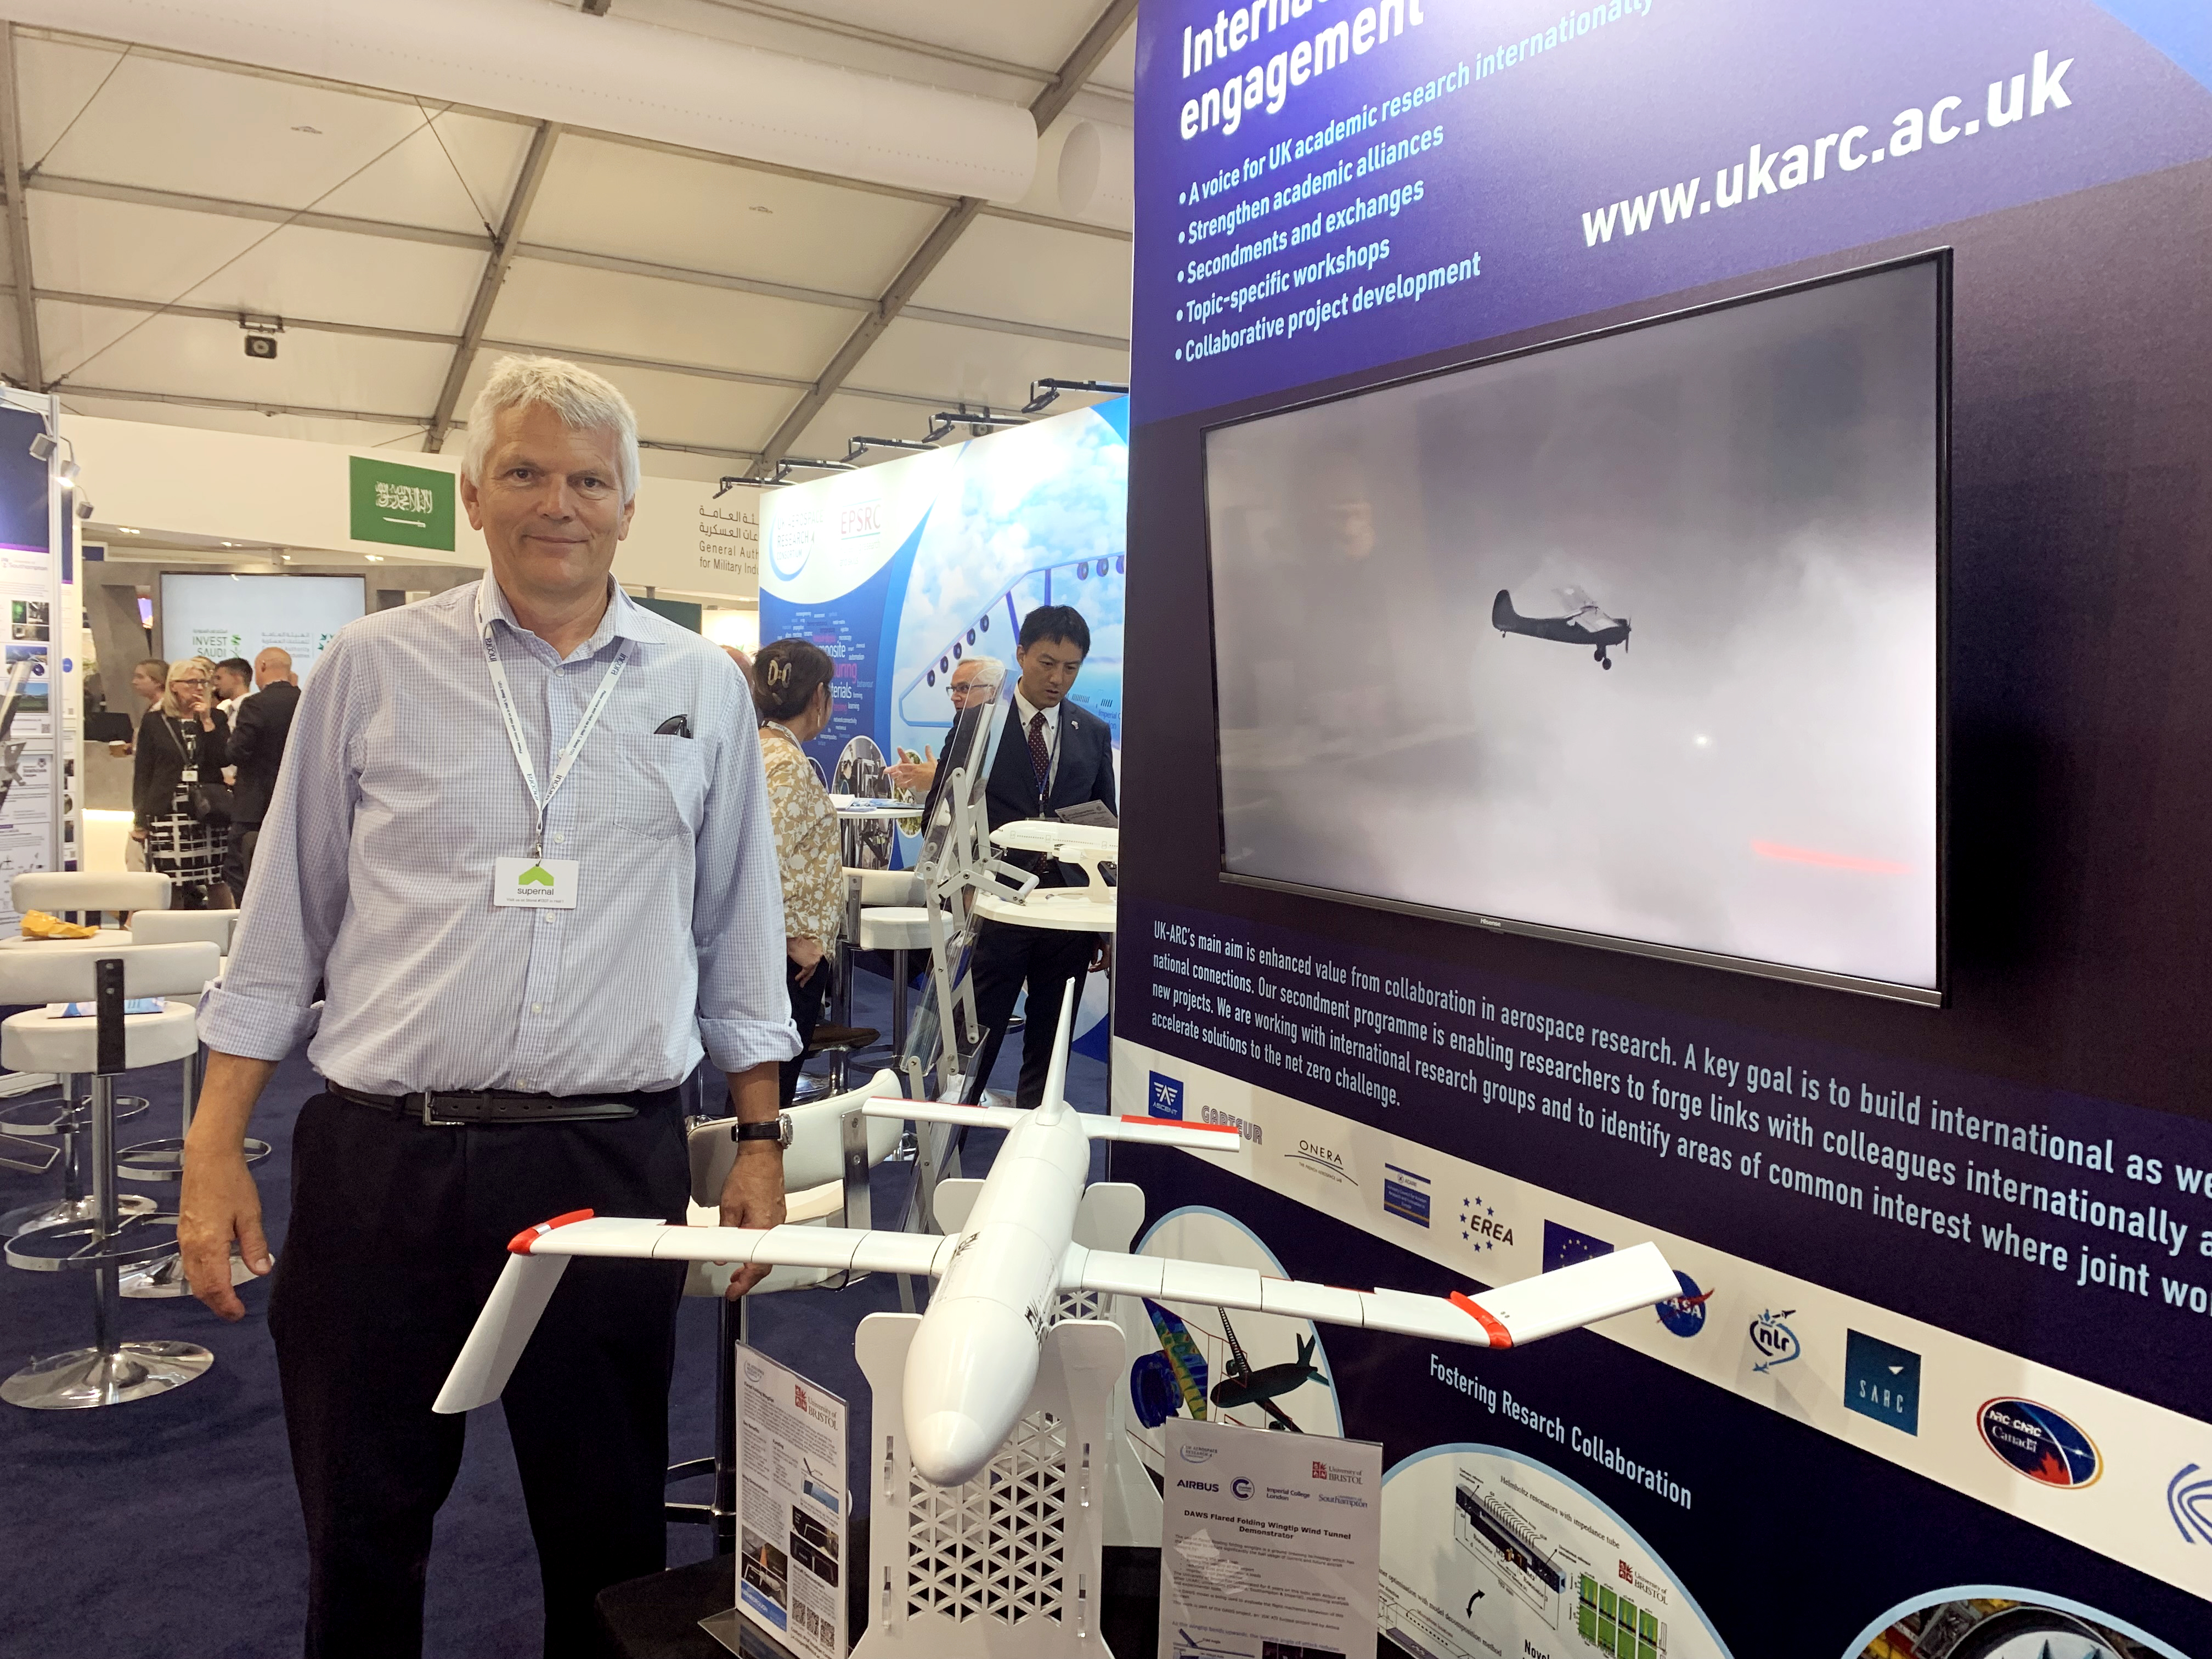 UK student project develops foldable wings for air travel